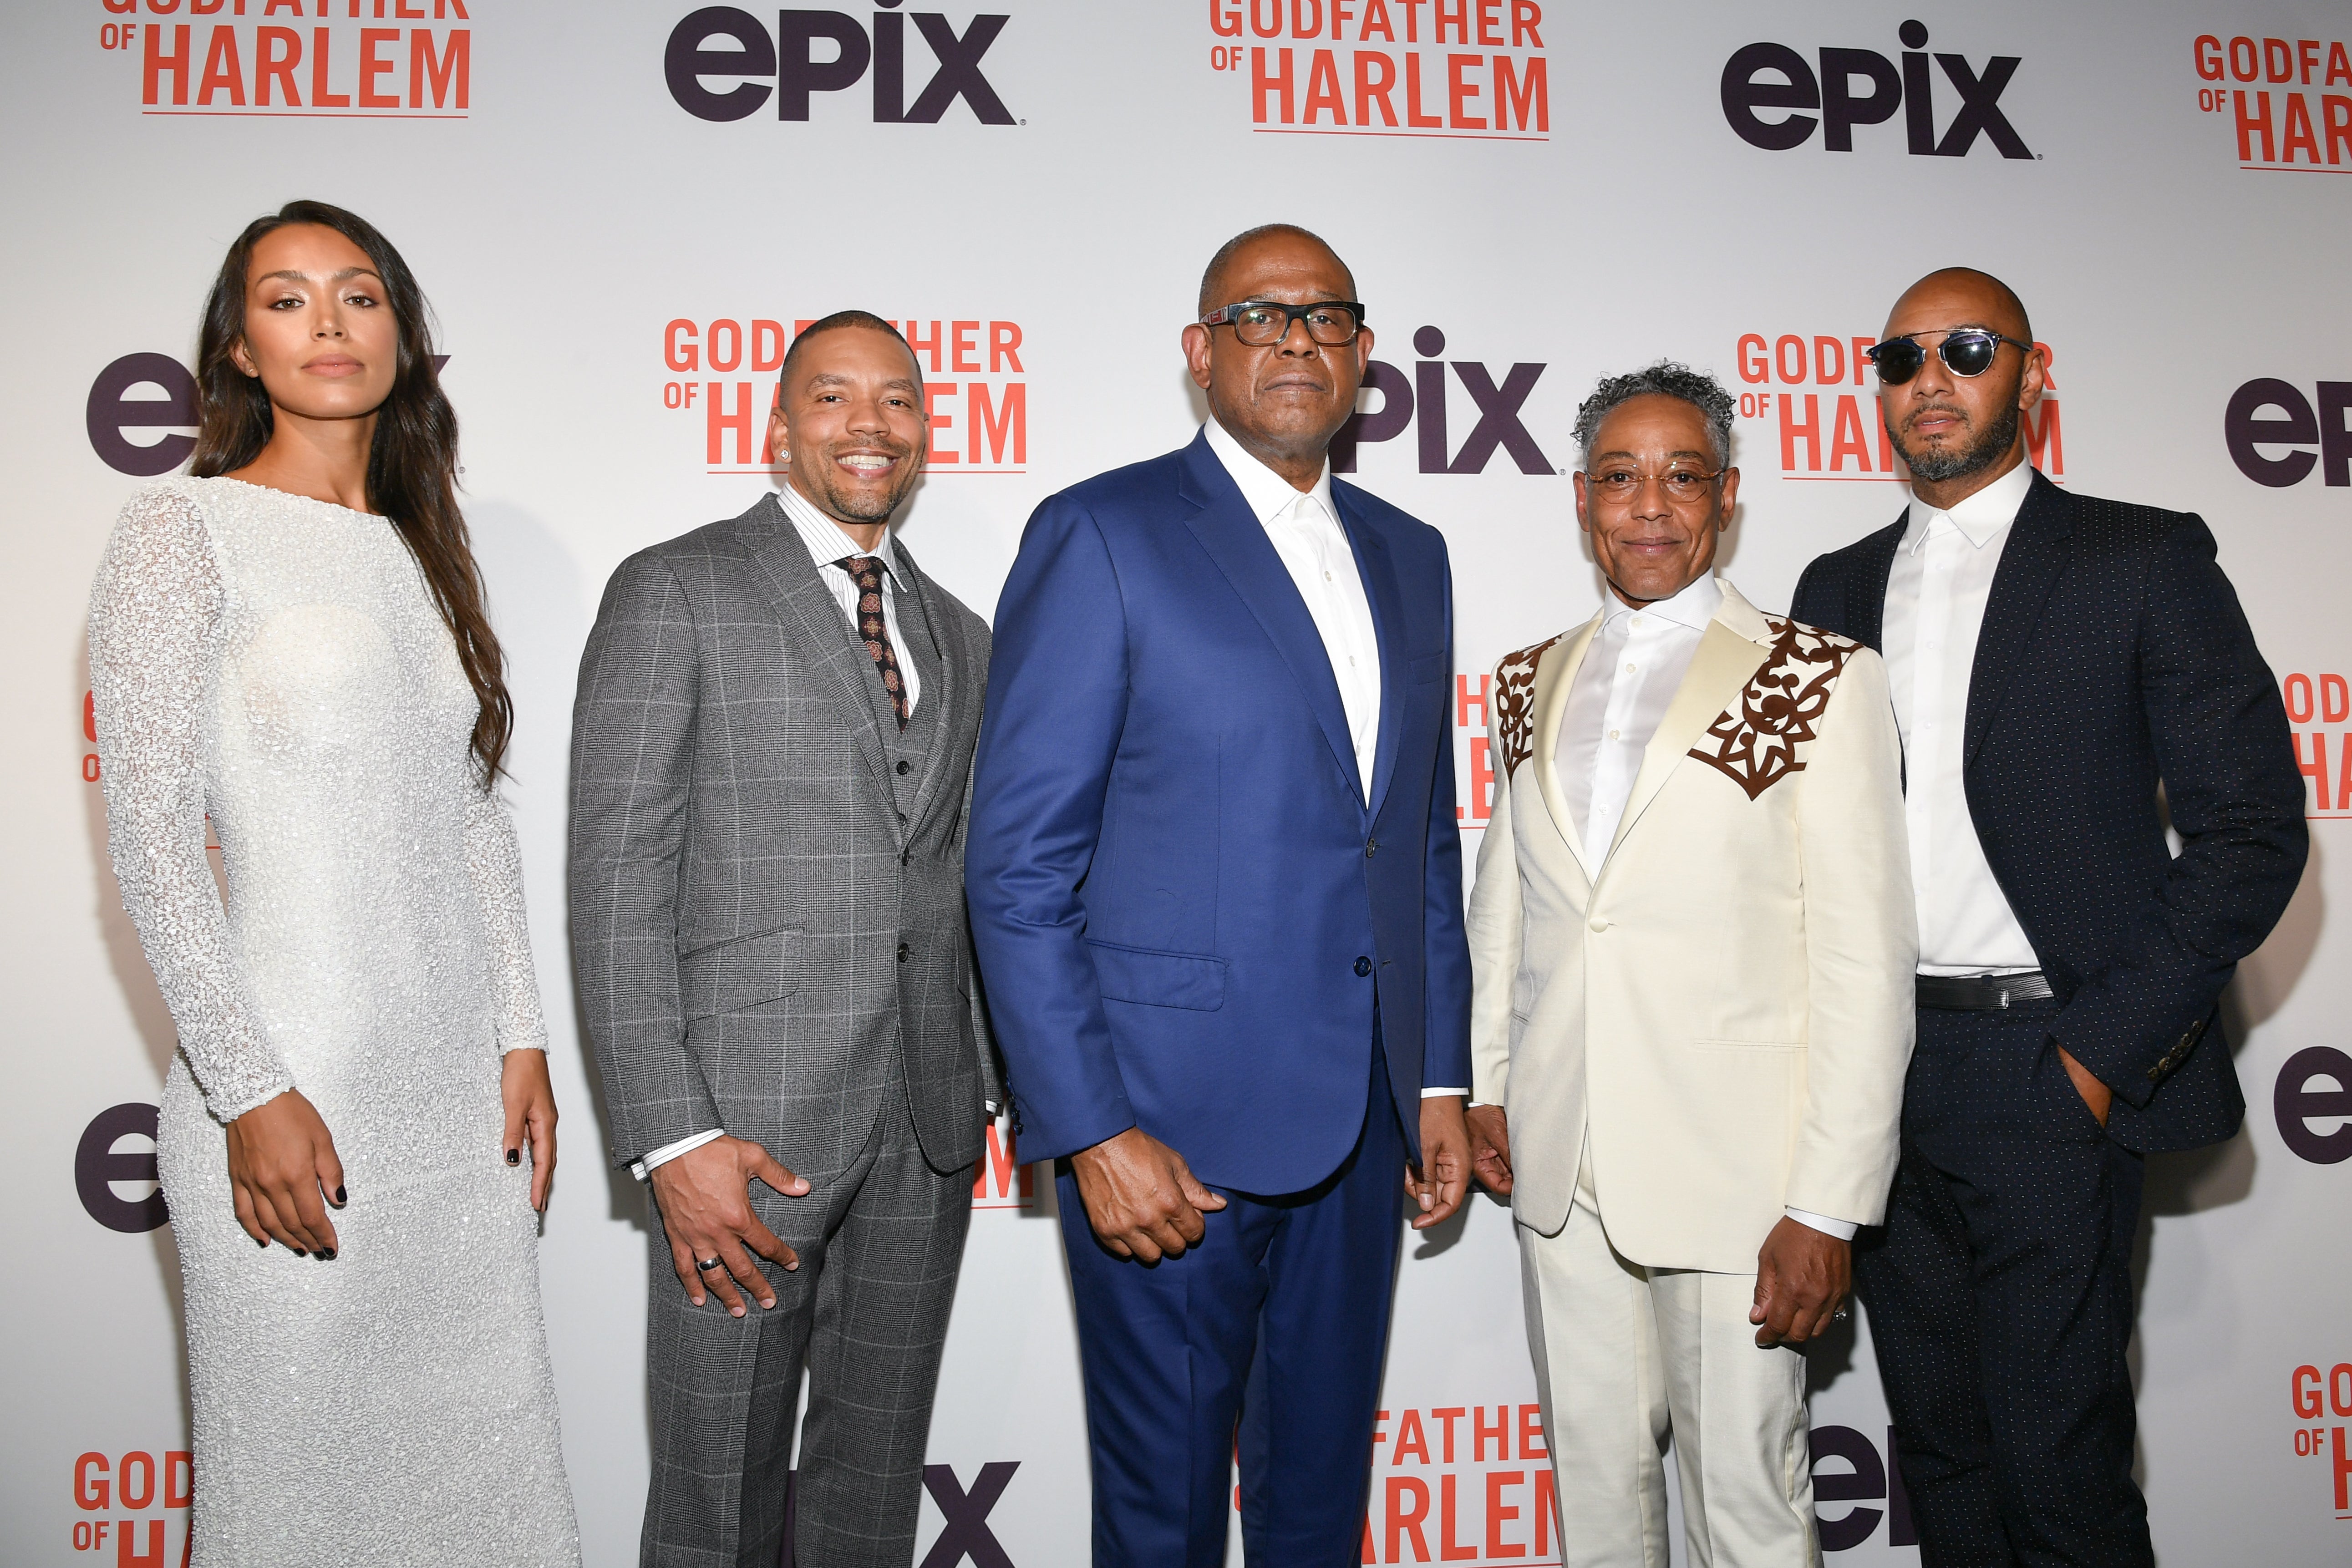 Have You Watched “The Godfather Of Harlem” Yet?